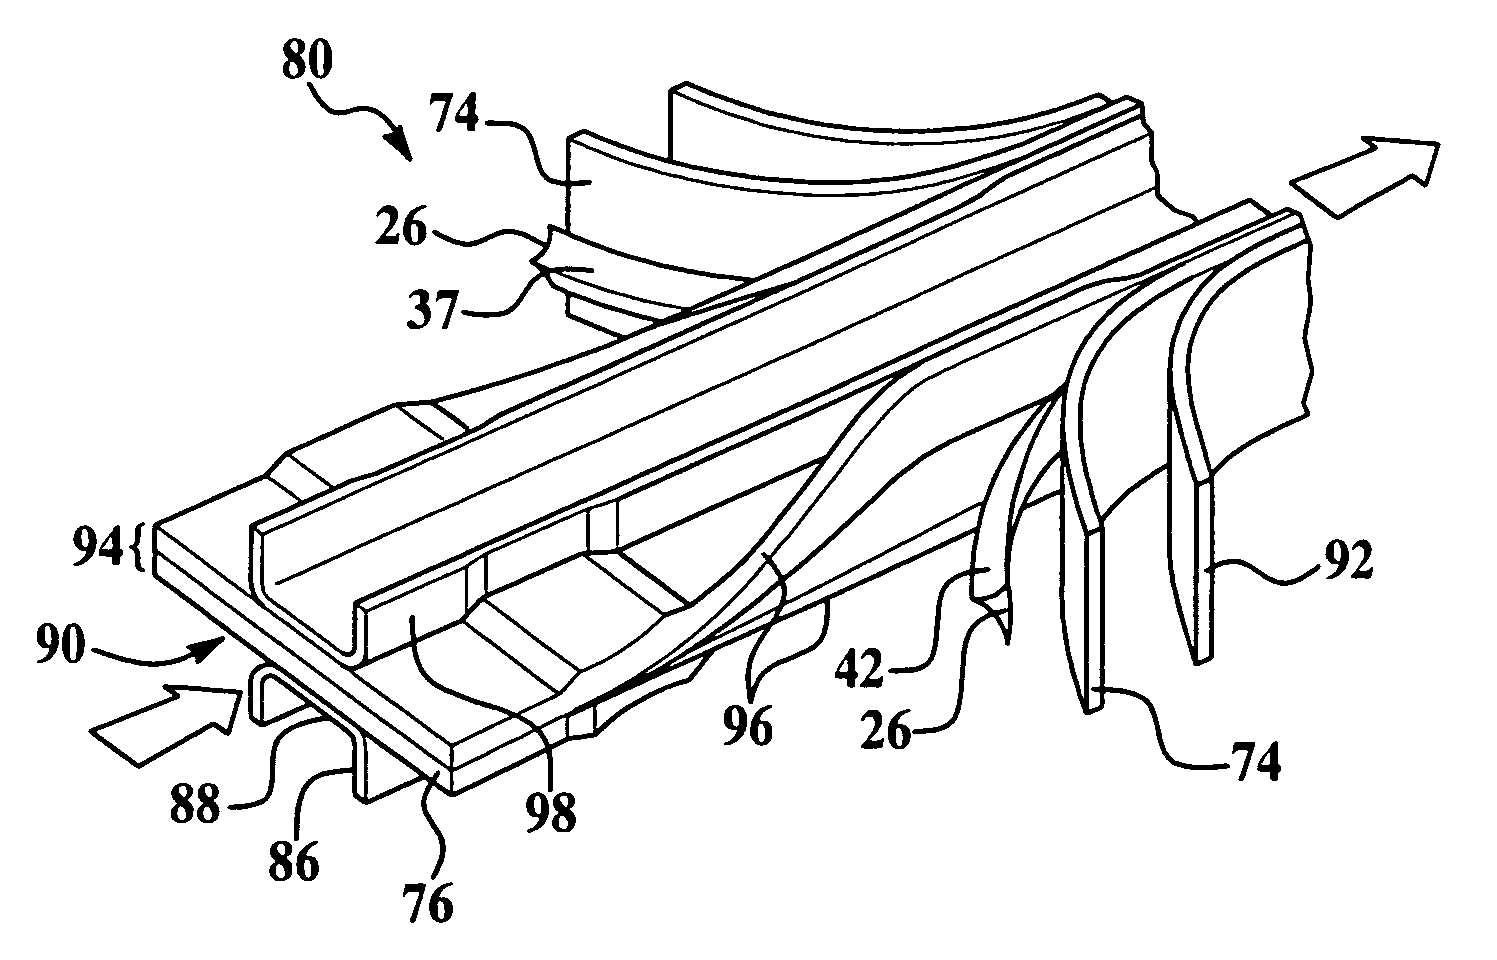 Method for fabricating curved thermoplastic composite parts